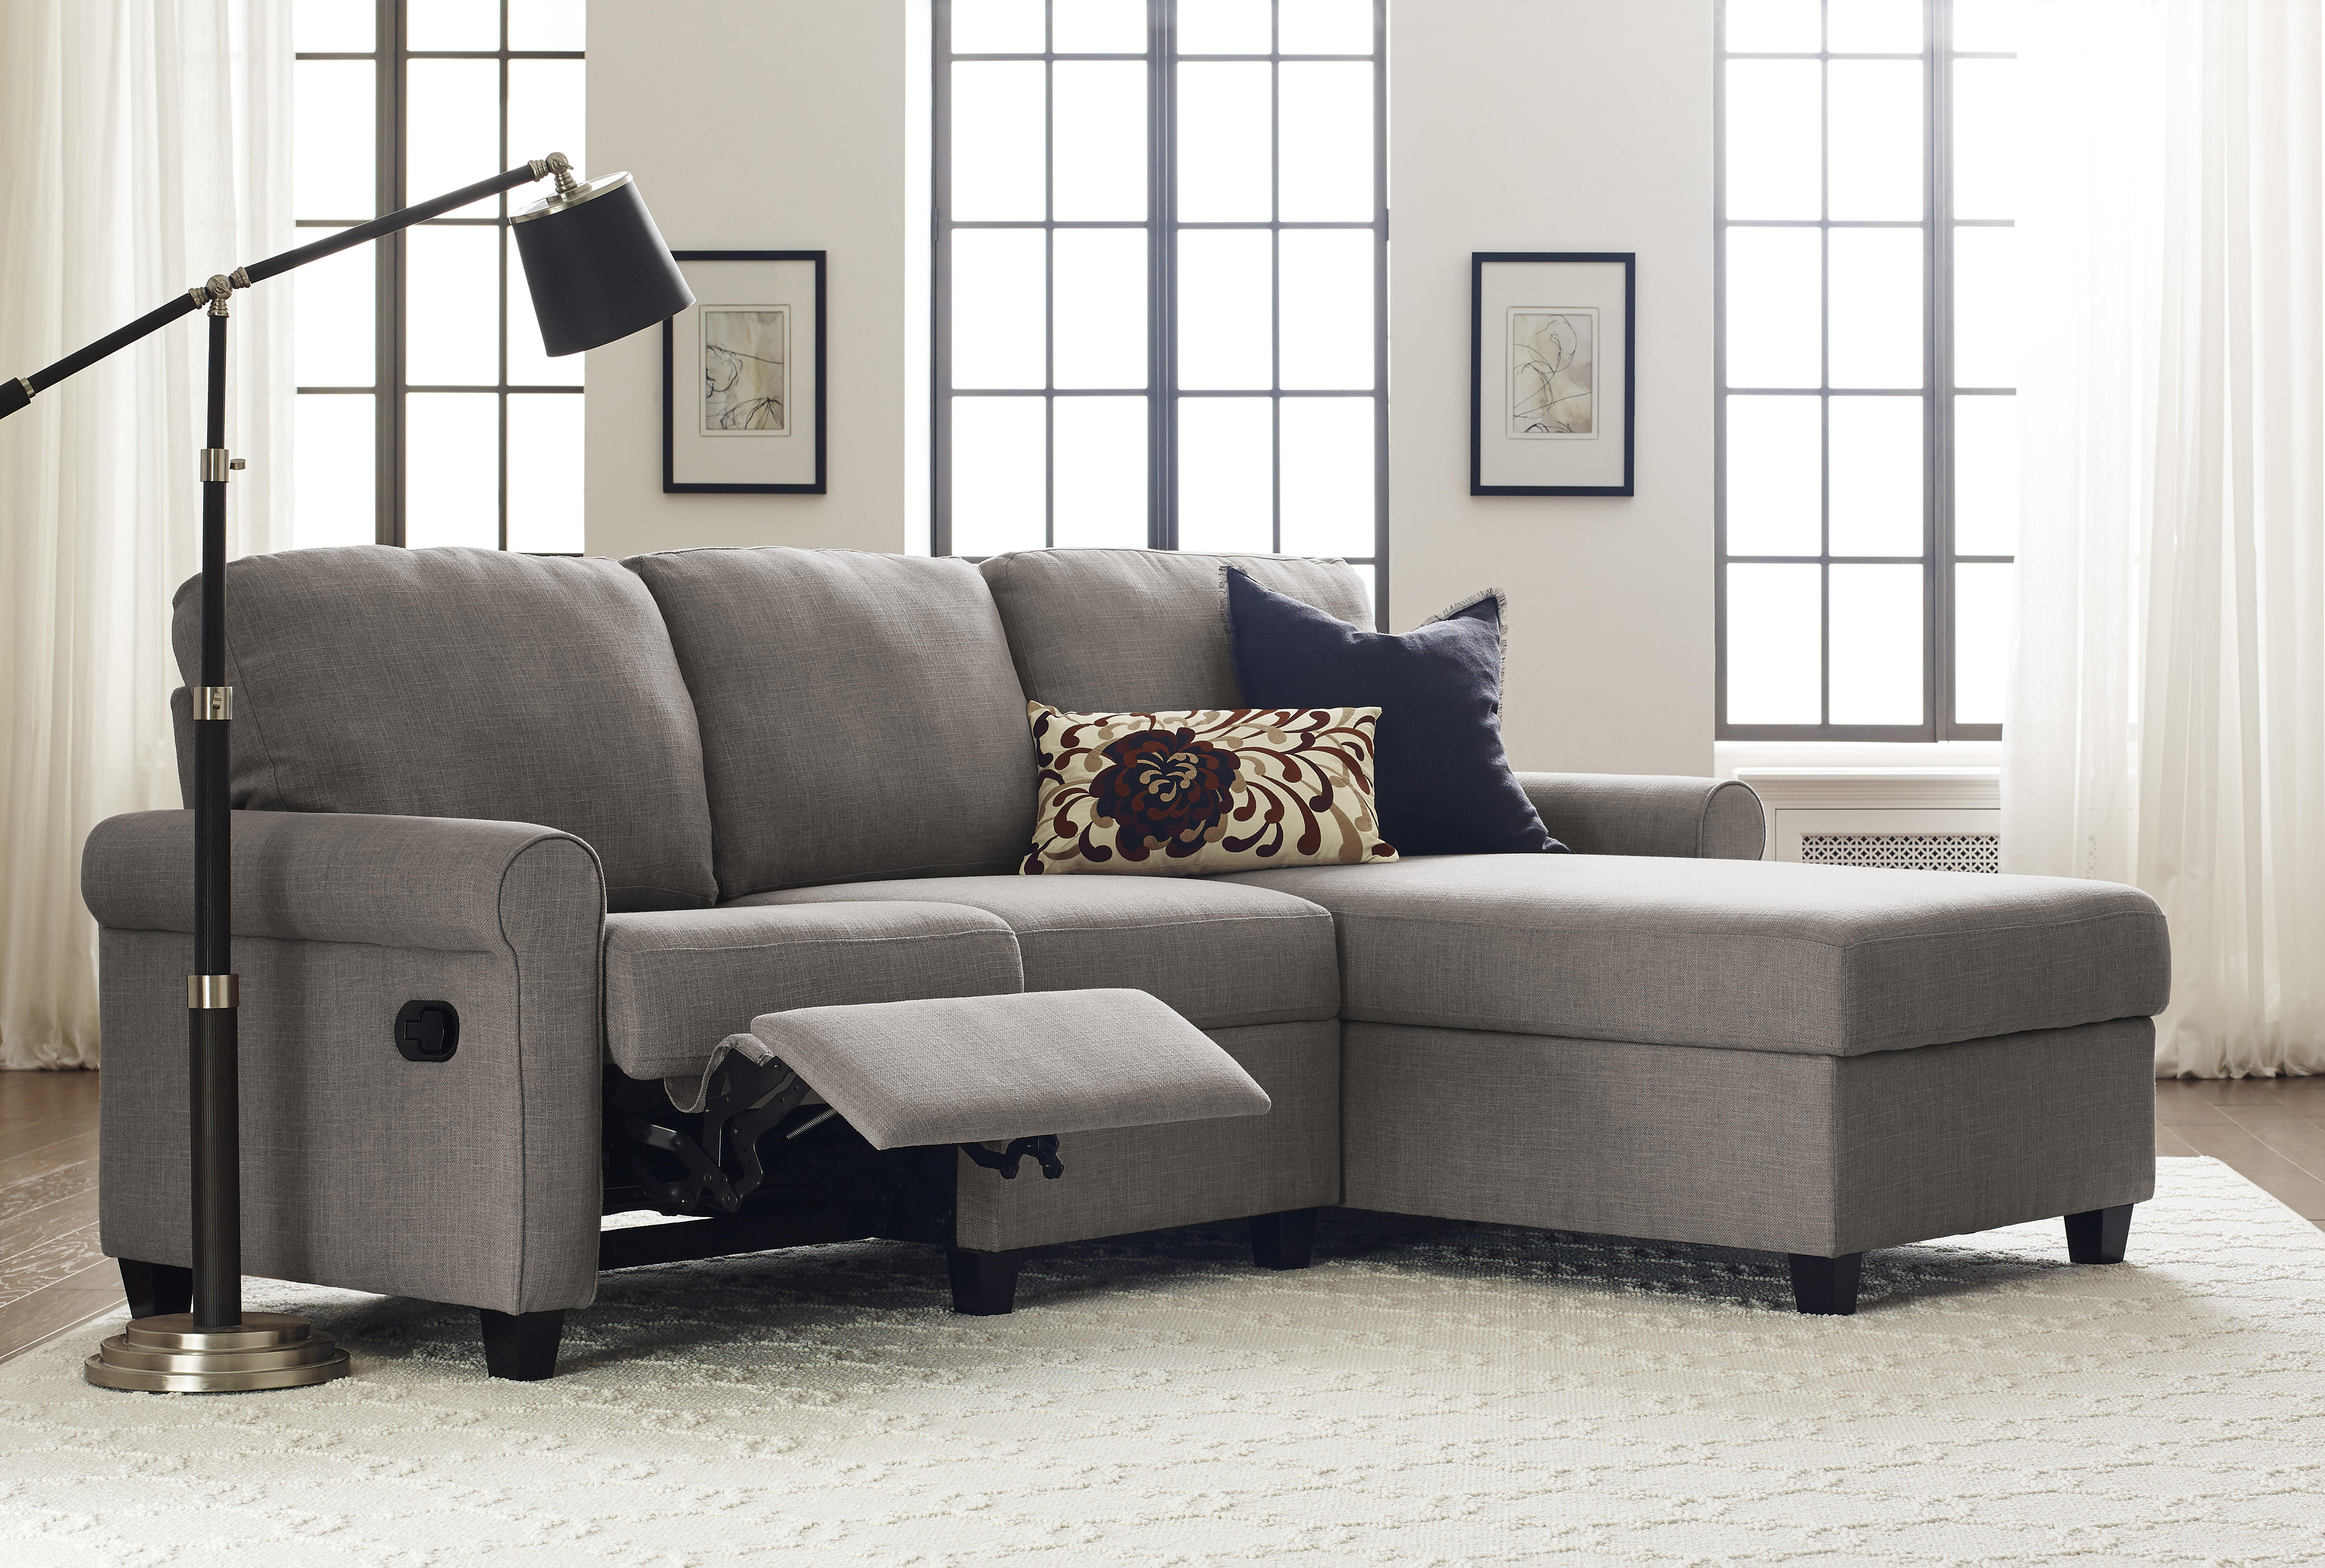 Serta Copenhagen Reclining Sectional with Right Storage Chaise - Gray - image 1 of 10